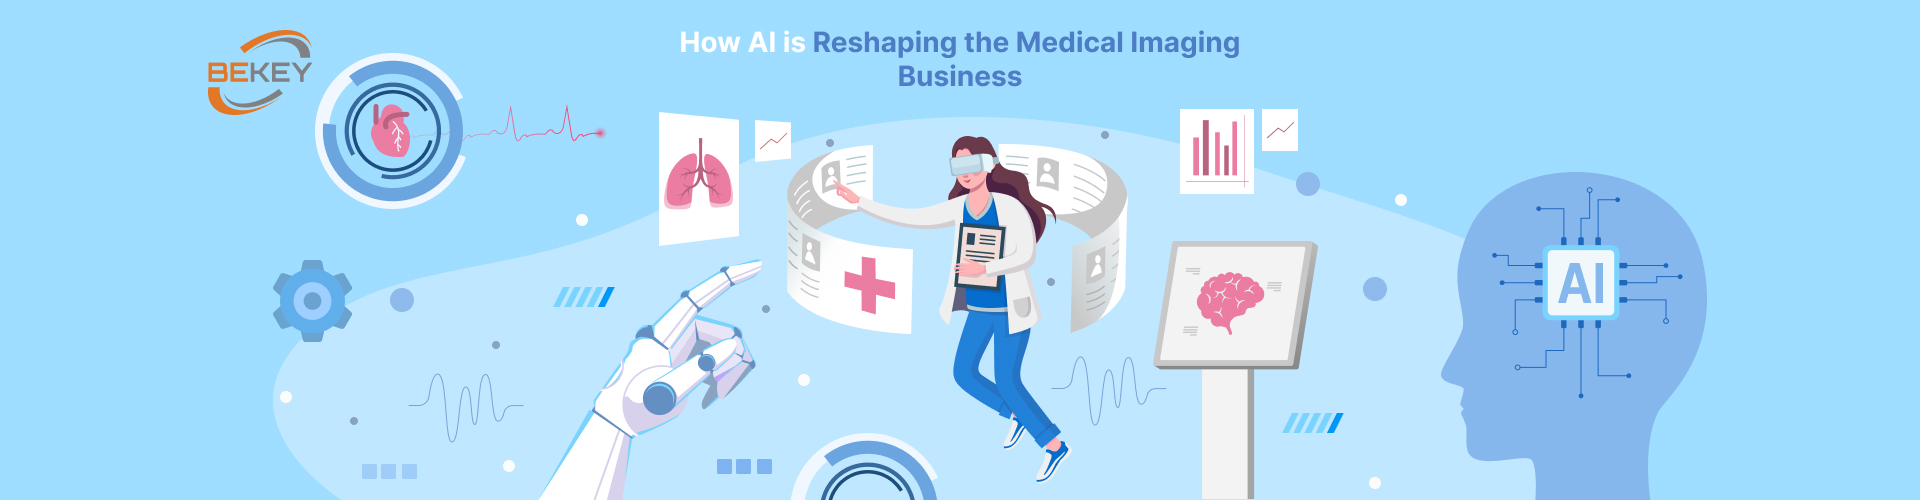 How AI is Reshaping the Medical Imaging Business - image